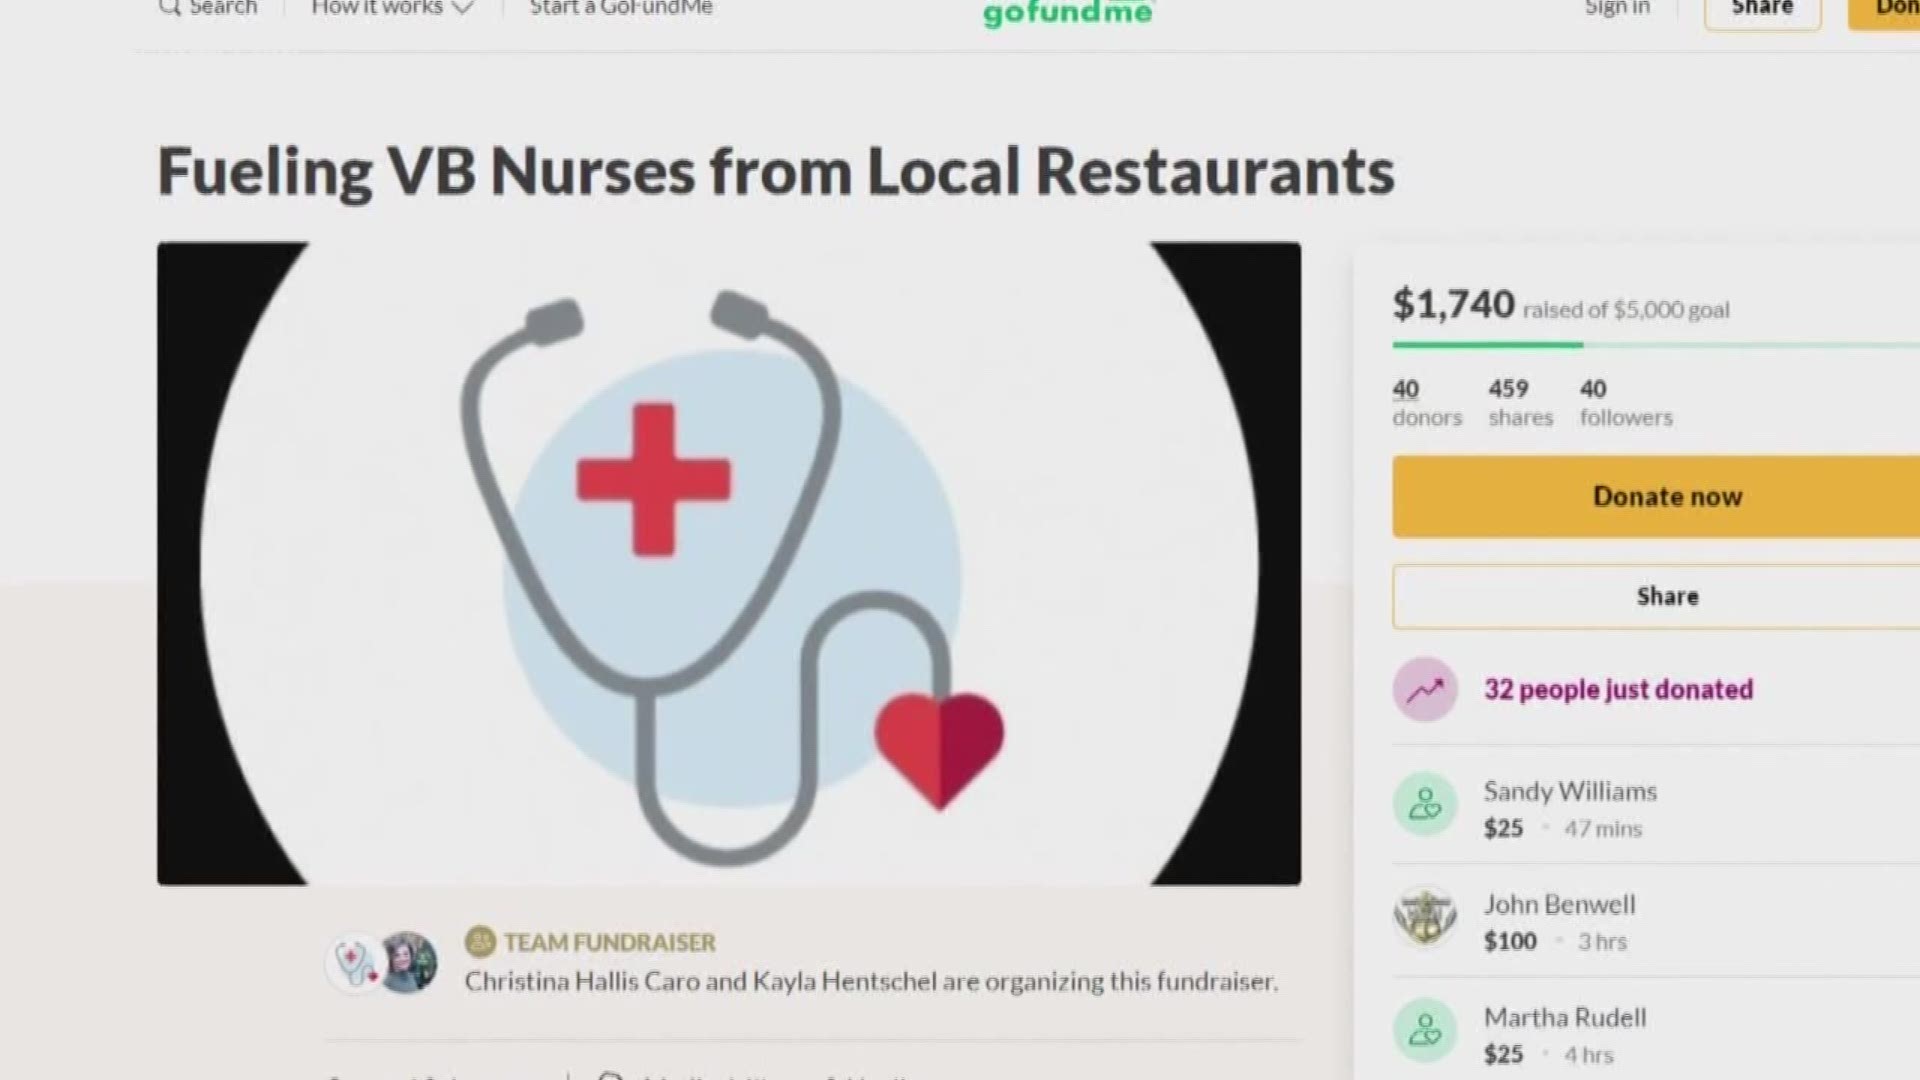 Two Virginia Beach women are raising money to buy meals for medical staff fighting coronavirus. Nurses have been struggling to buy food with restaurant closures.